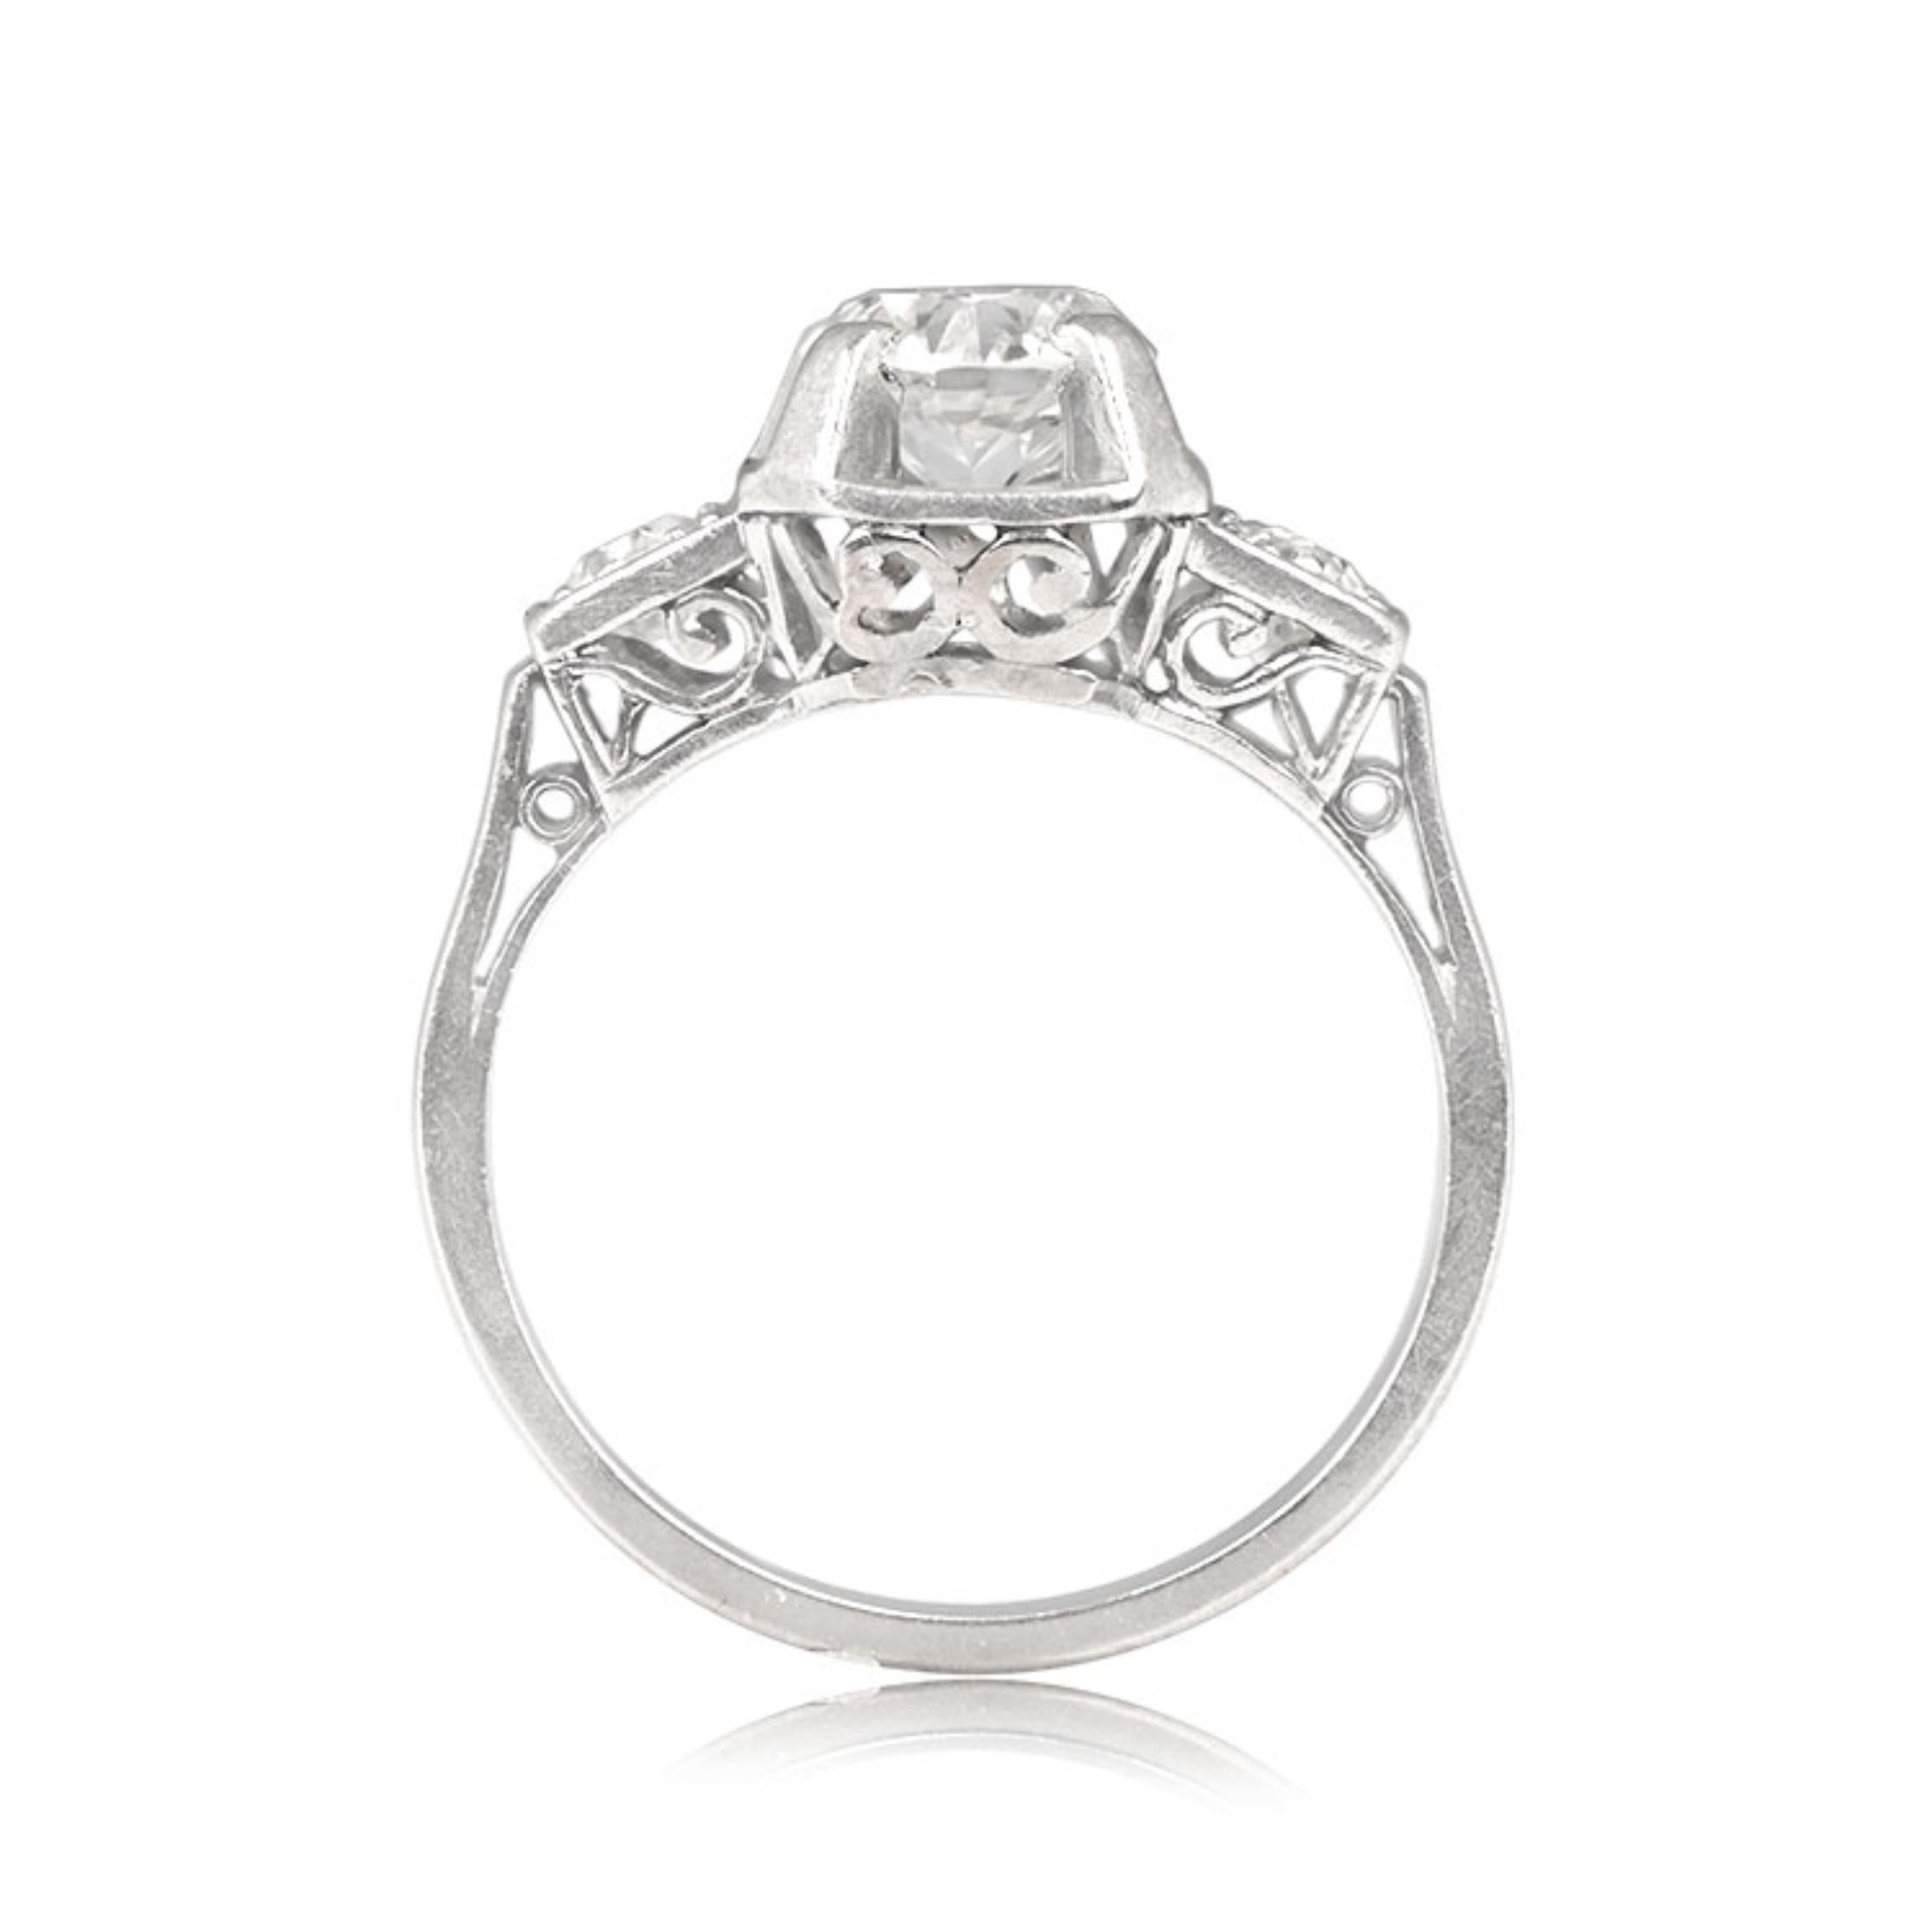 An exquisite French Art Deco platinum ring showcases a 0.85-carat old European cut diamond in prongs. The J color, VS1 clarity center diamond is accented by single-cut diamonds on the shoulders. The open-work under-gallery adds intricate detail.